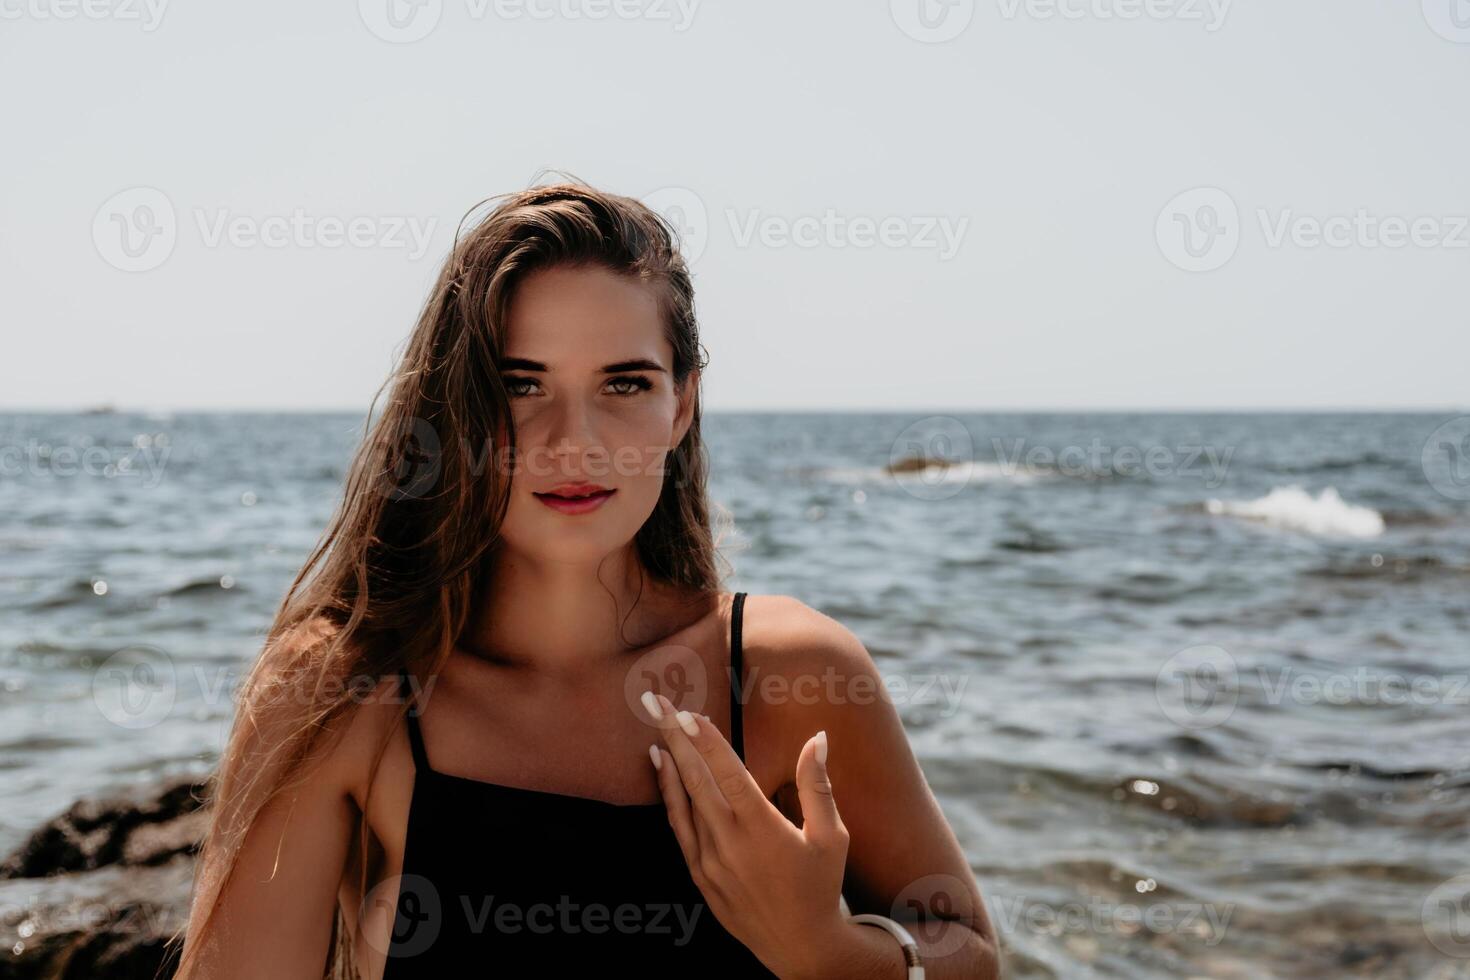 Woman summer travel sea. Happy tourist in hat enjoy taking picture outdoors for memories. Woman traveler posing on the beach at sea surrounded by volcanic mountains, sharing travel adventure journey photo